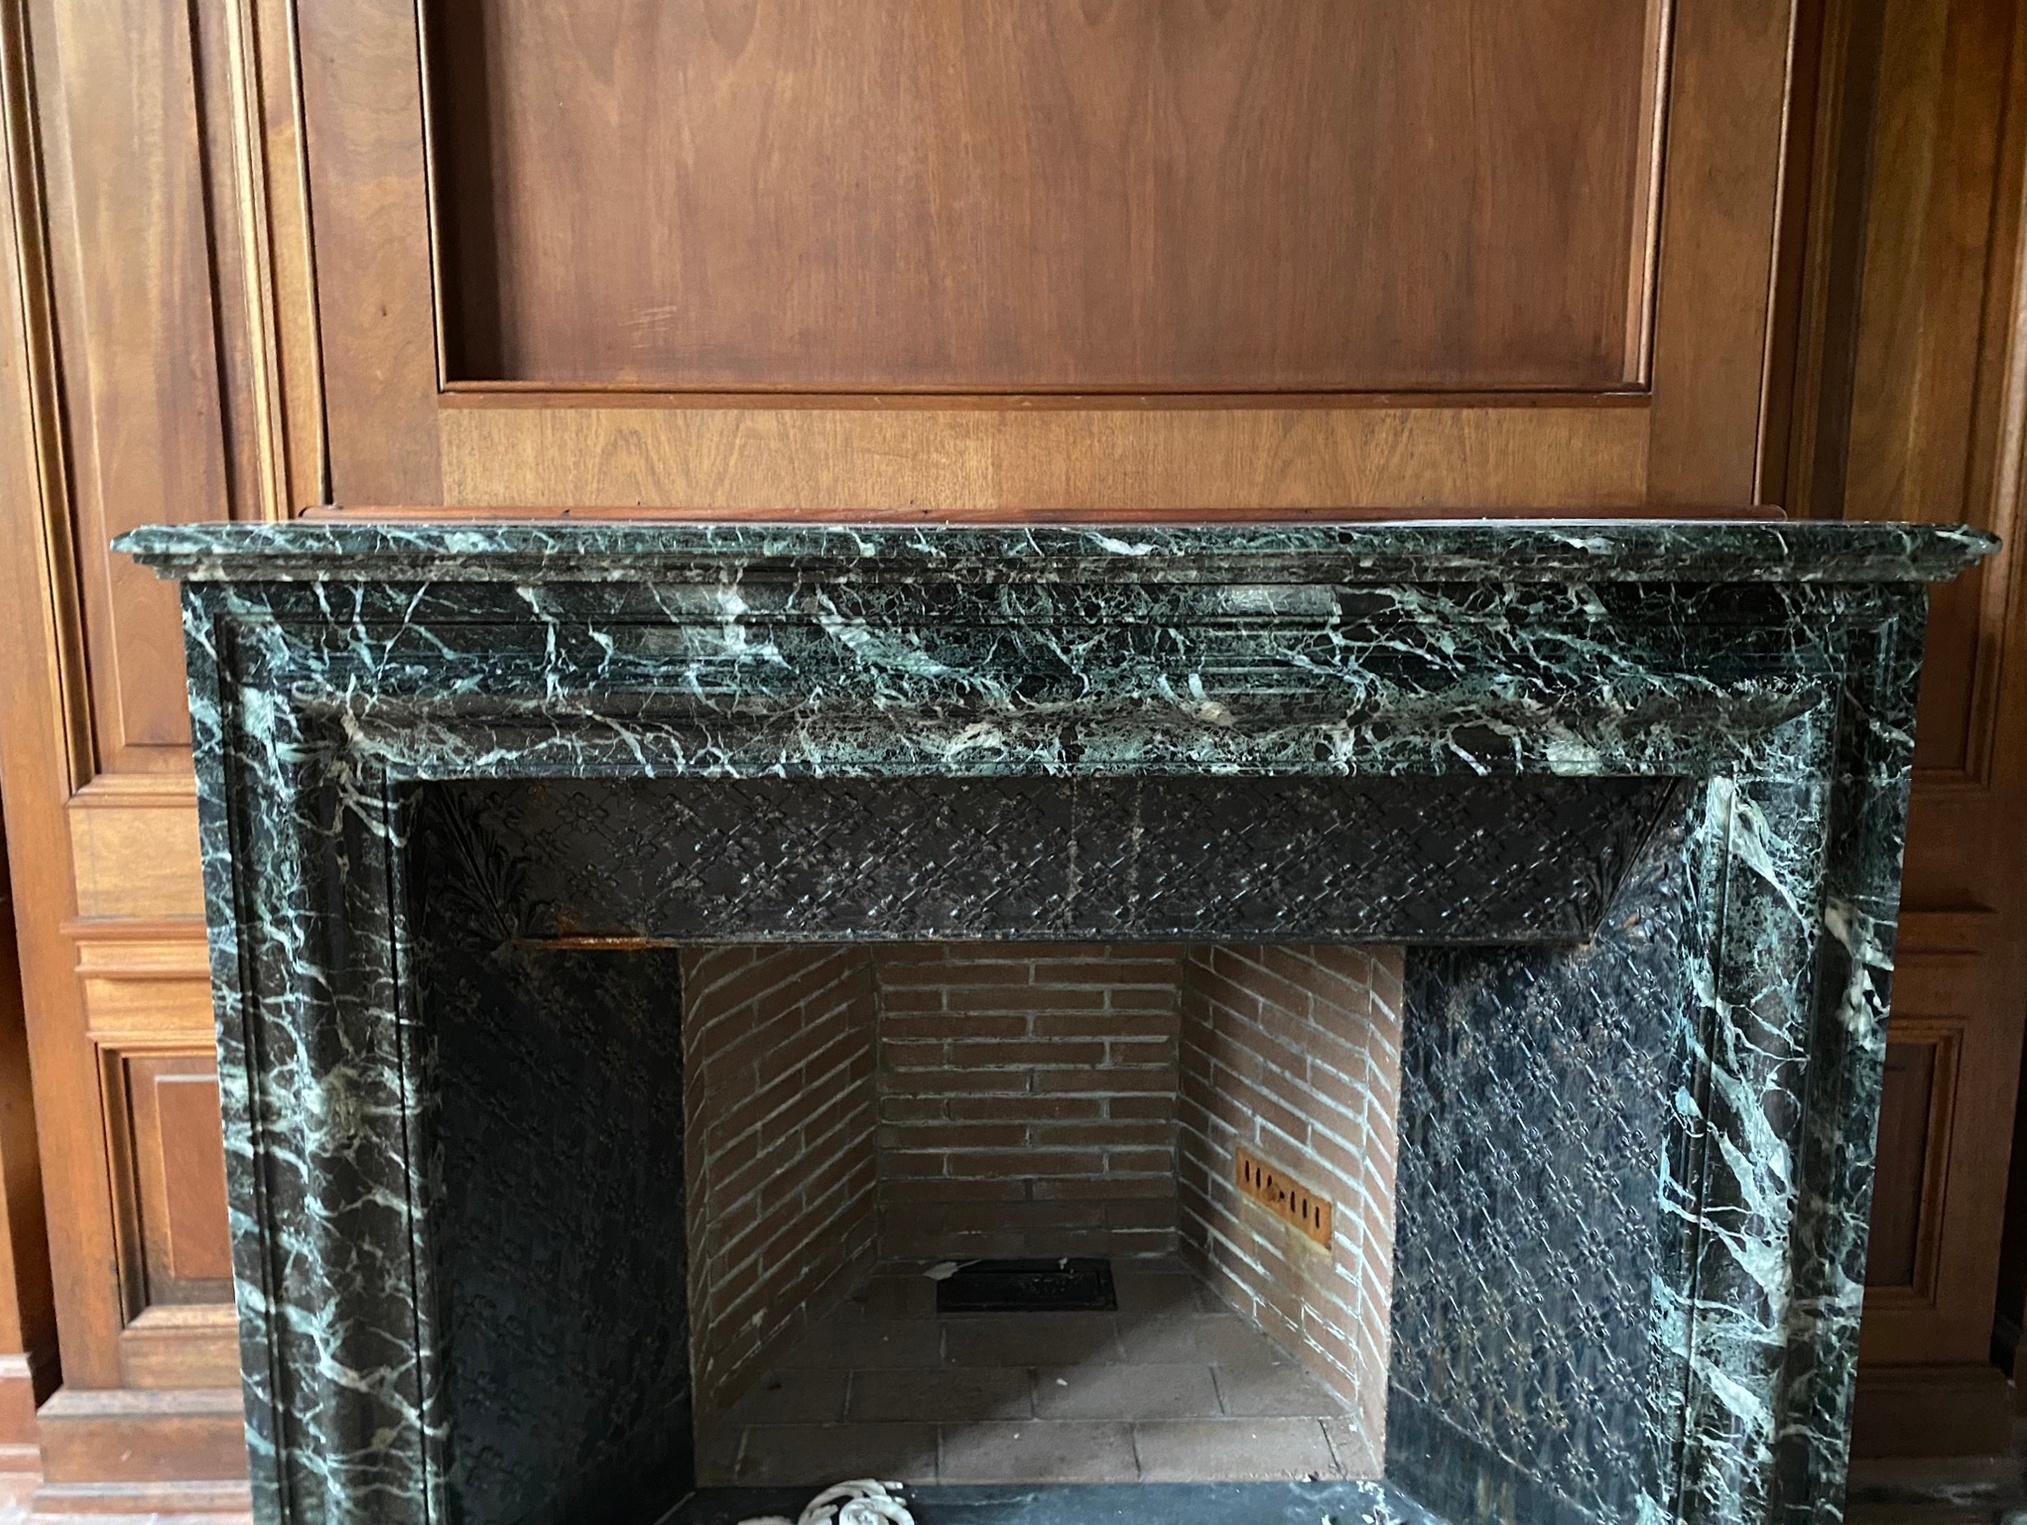 French dark green marble mantel with heavy white veining. This was retrieved from an estate located in Greenwich, Connecticut. Good condition with appropriate wear from age. One available. Please note, this item is located in one of our NYC